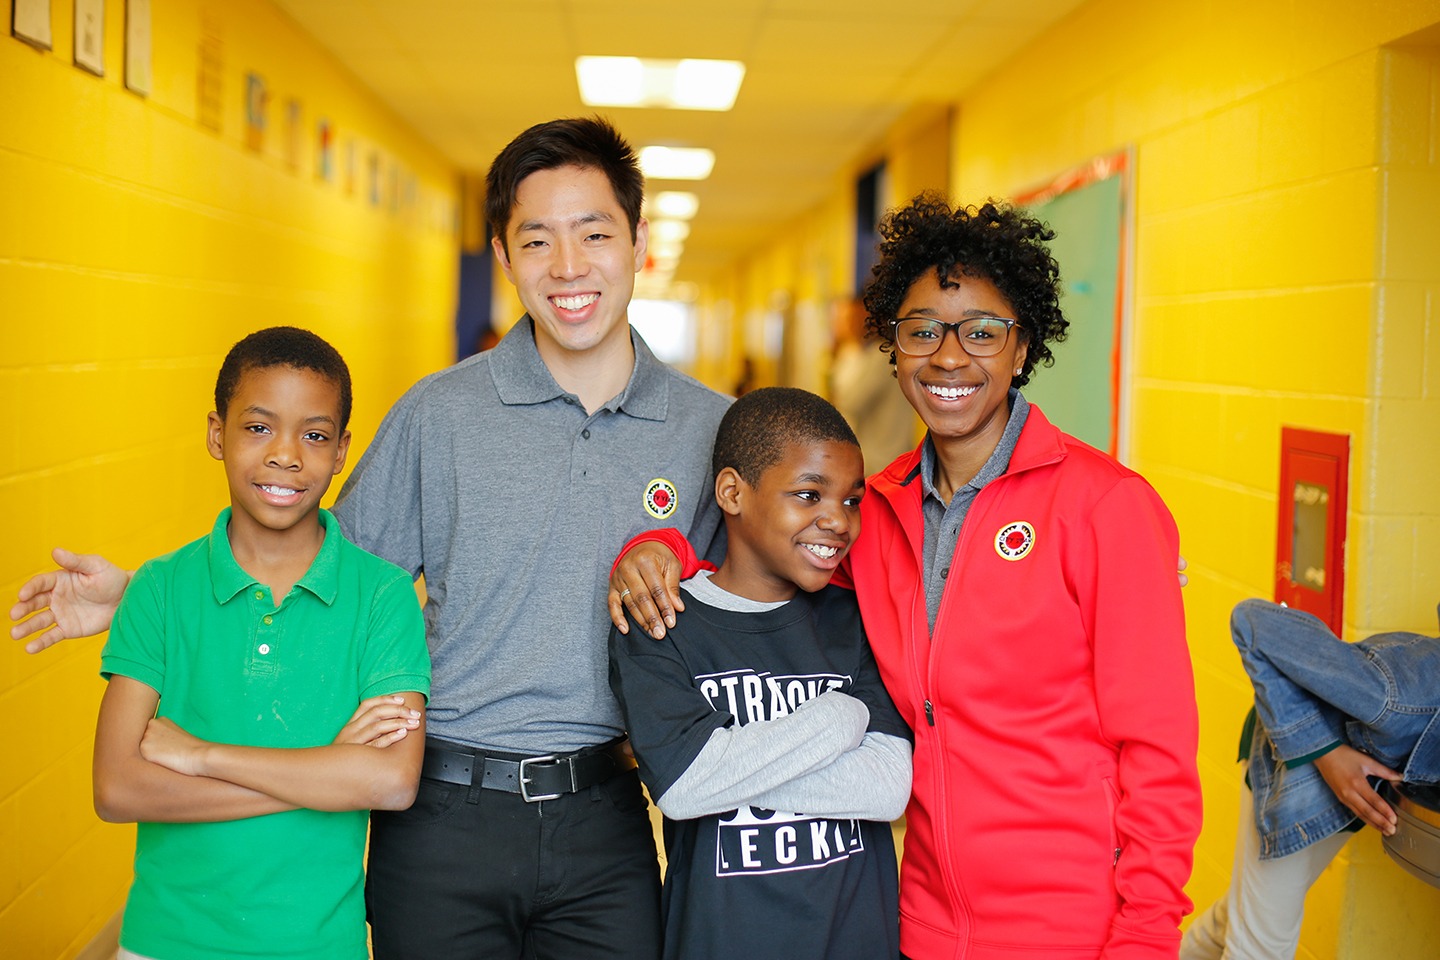 Two city year americorps members posing with two young students in a school hallway.